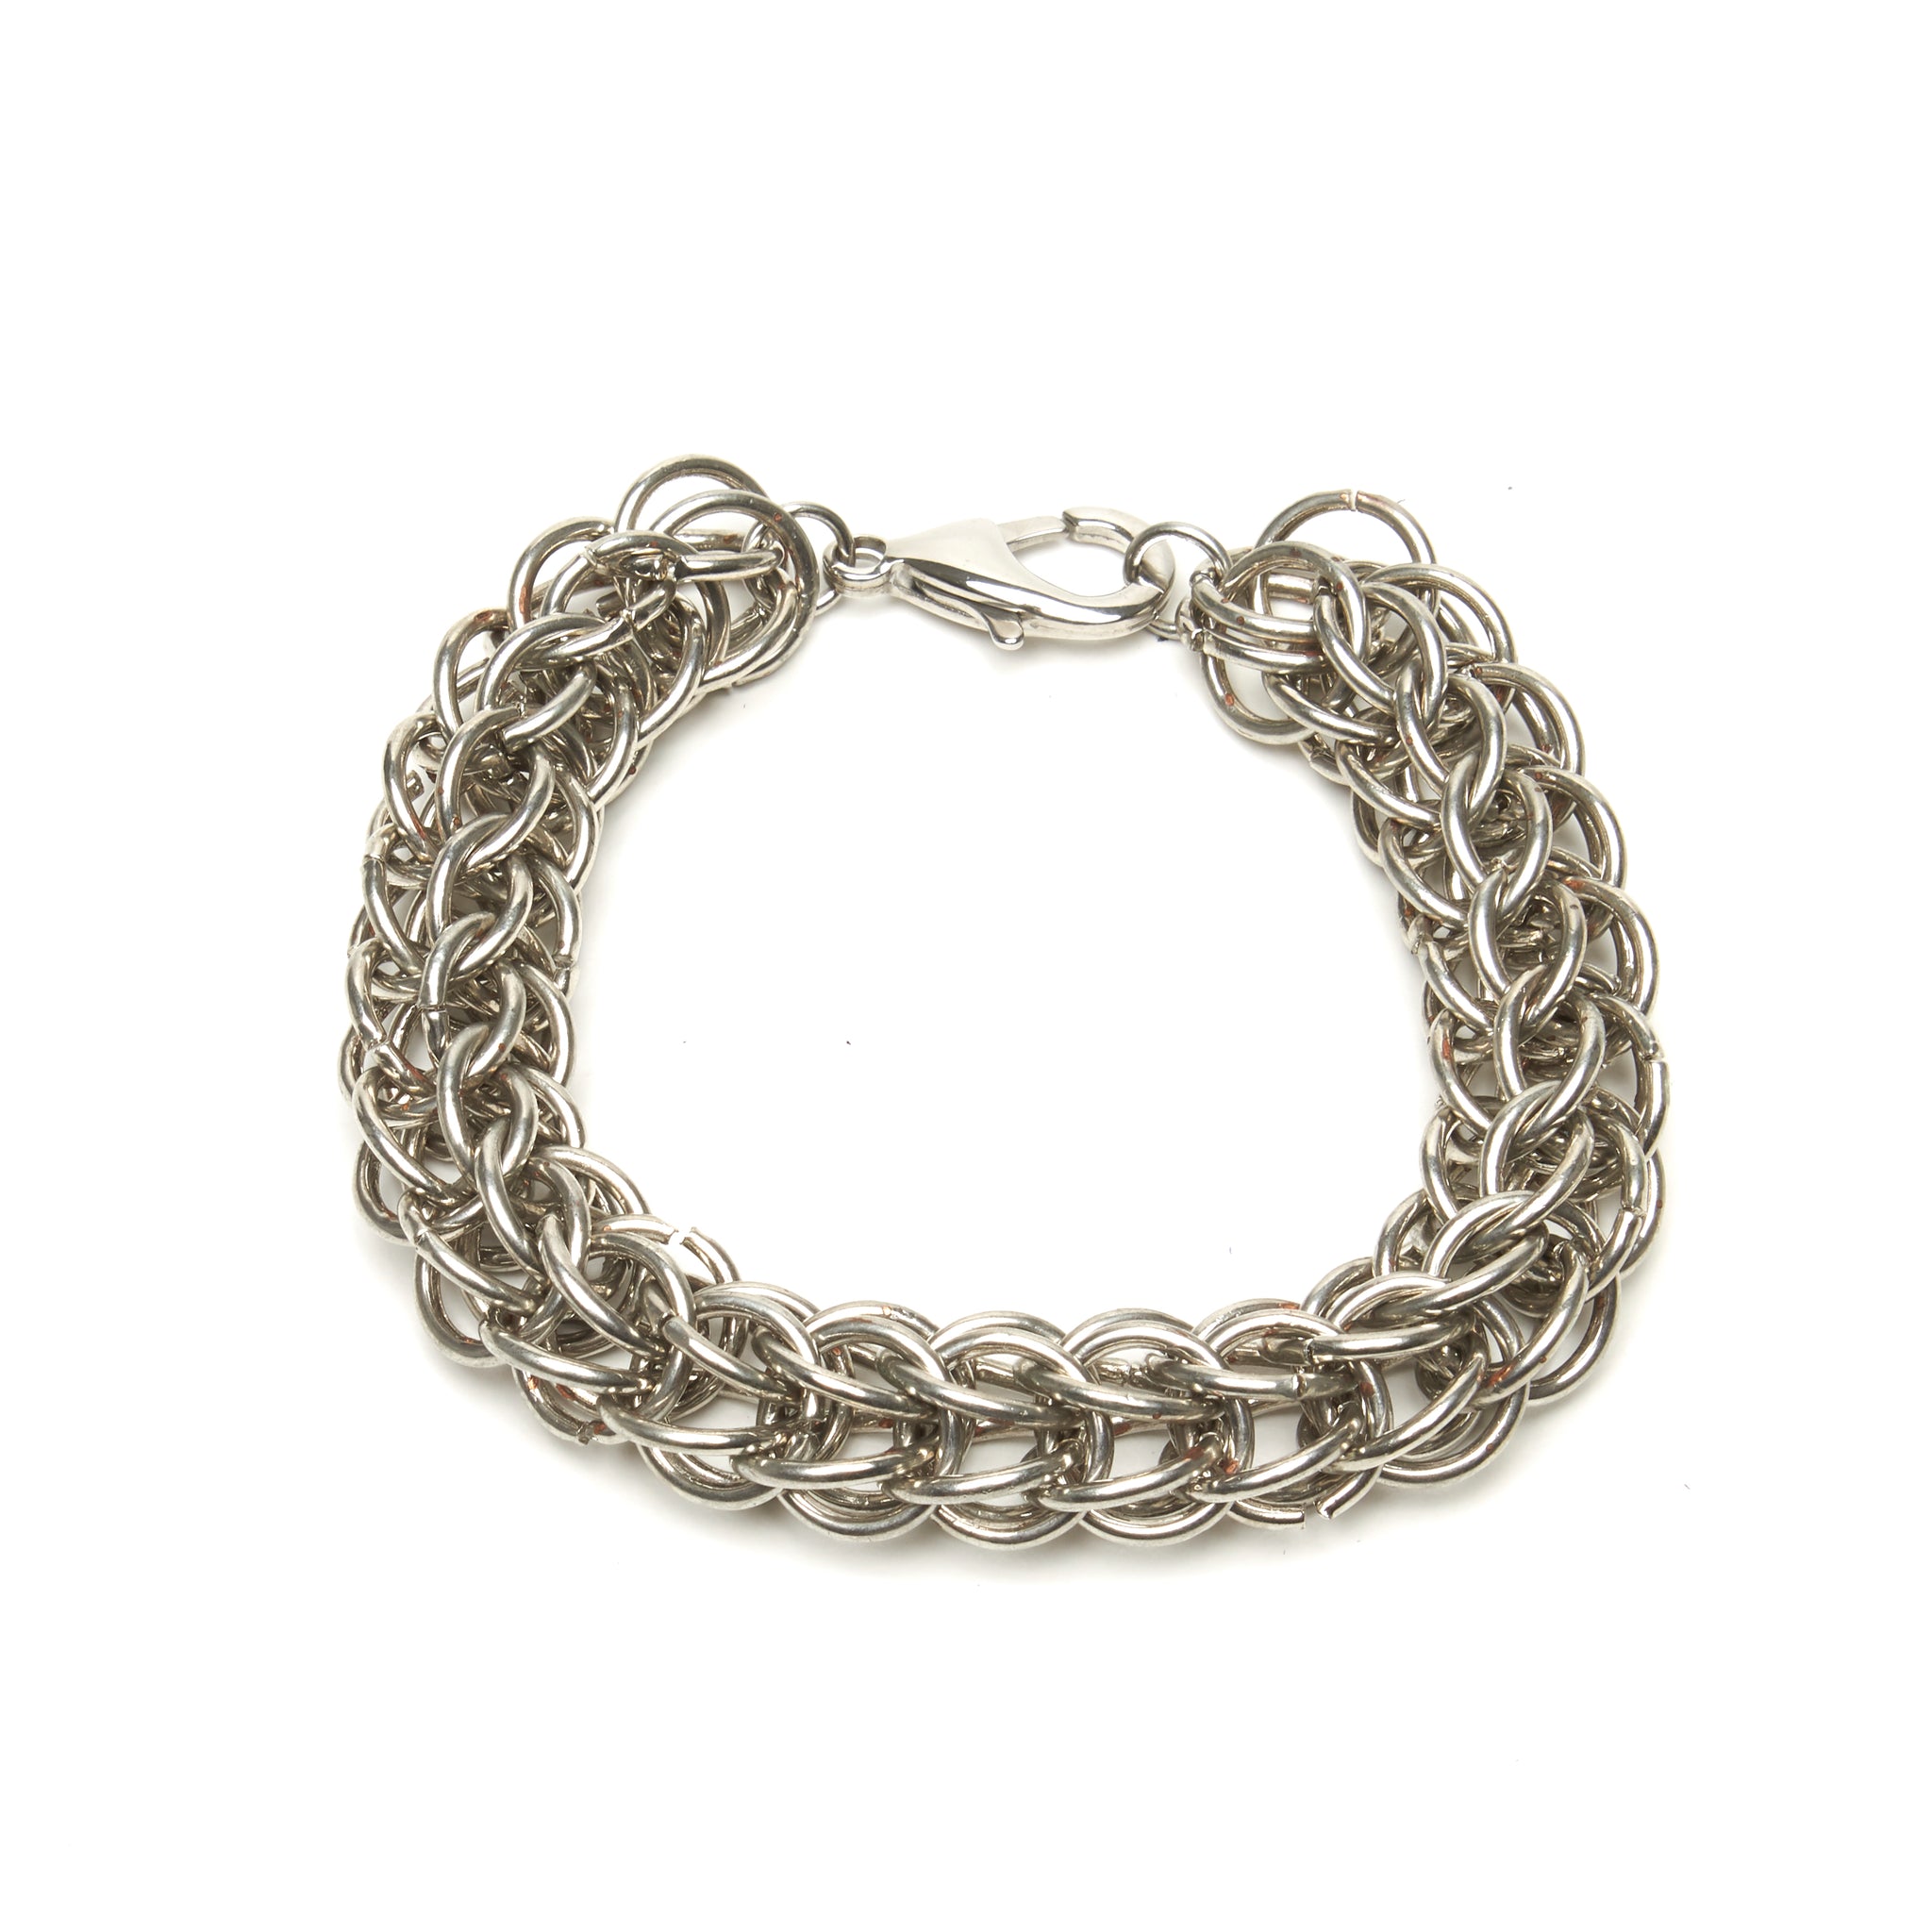 THICK PERSIAN WEAVE CHAINMAILLE BRACELET. by NYET Jewelry.